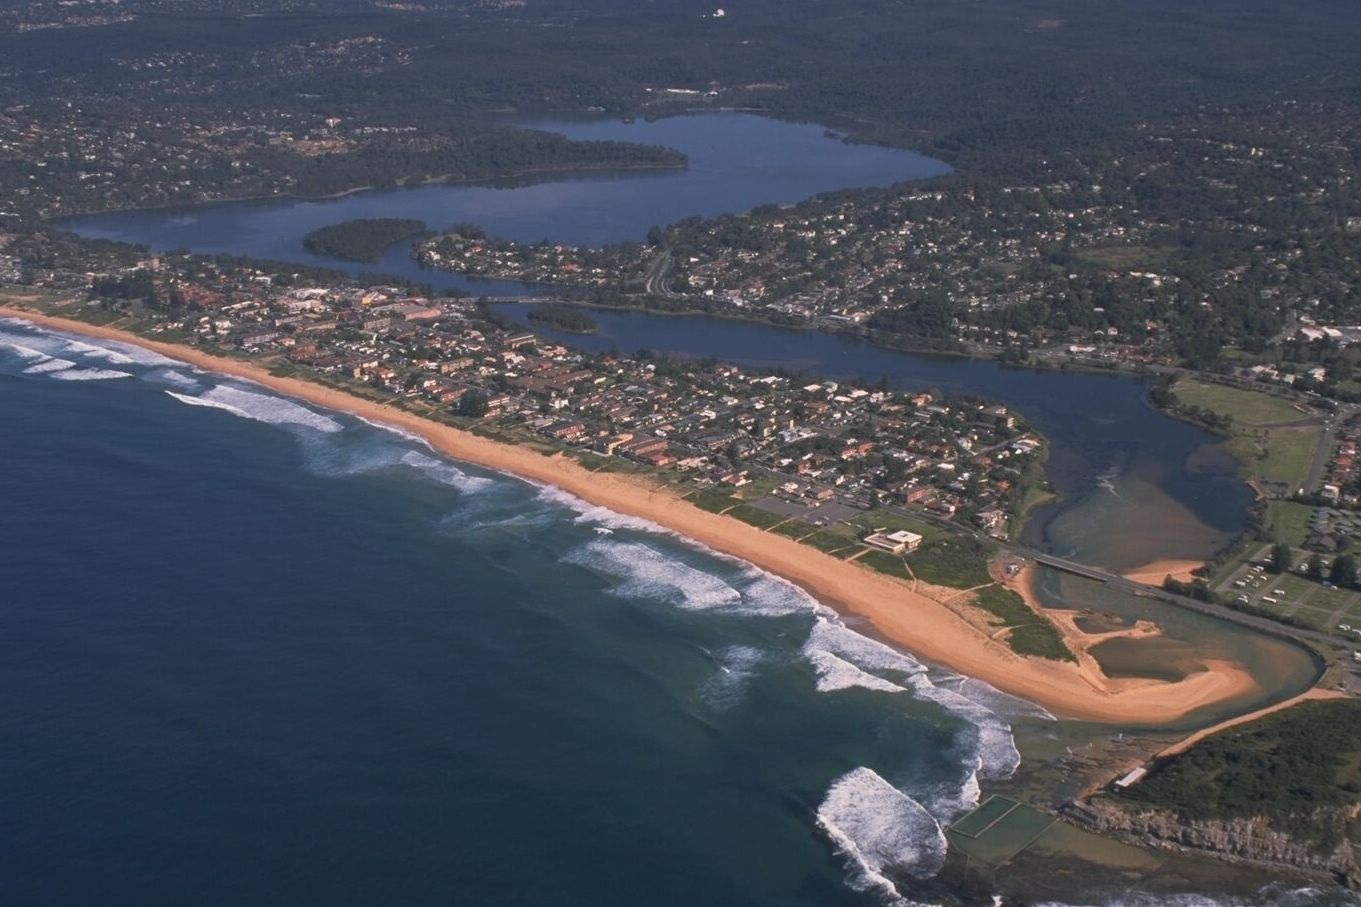 Aerial view of Narrabeen Beach and Lagoon